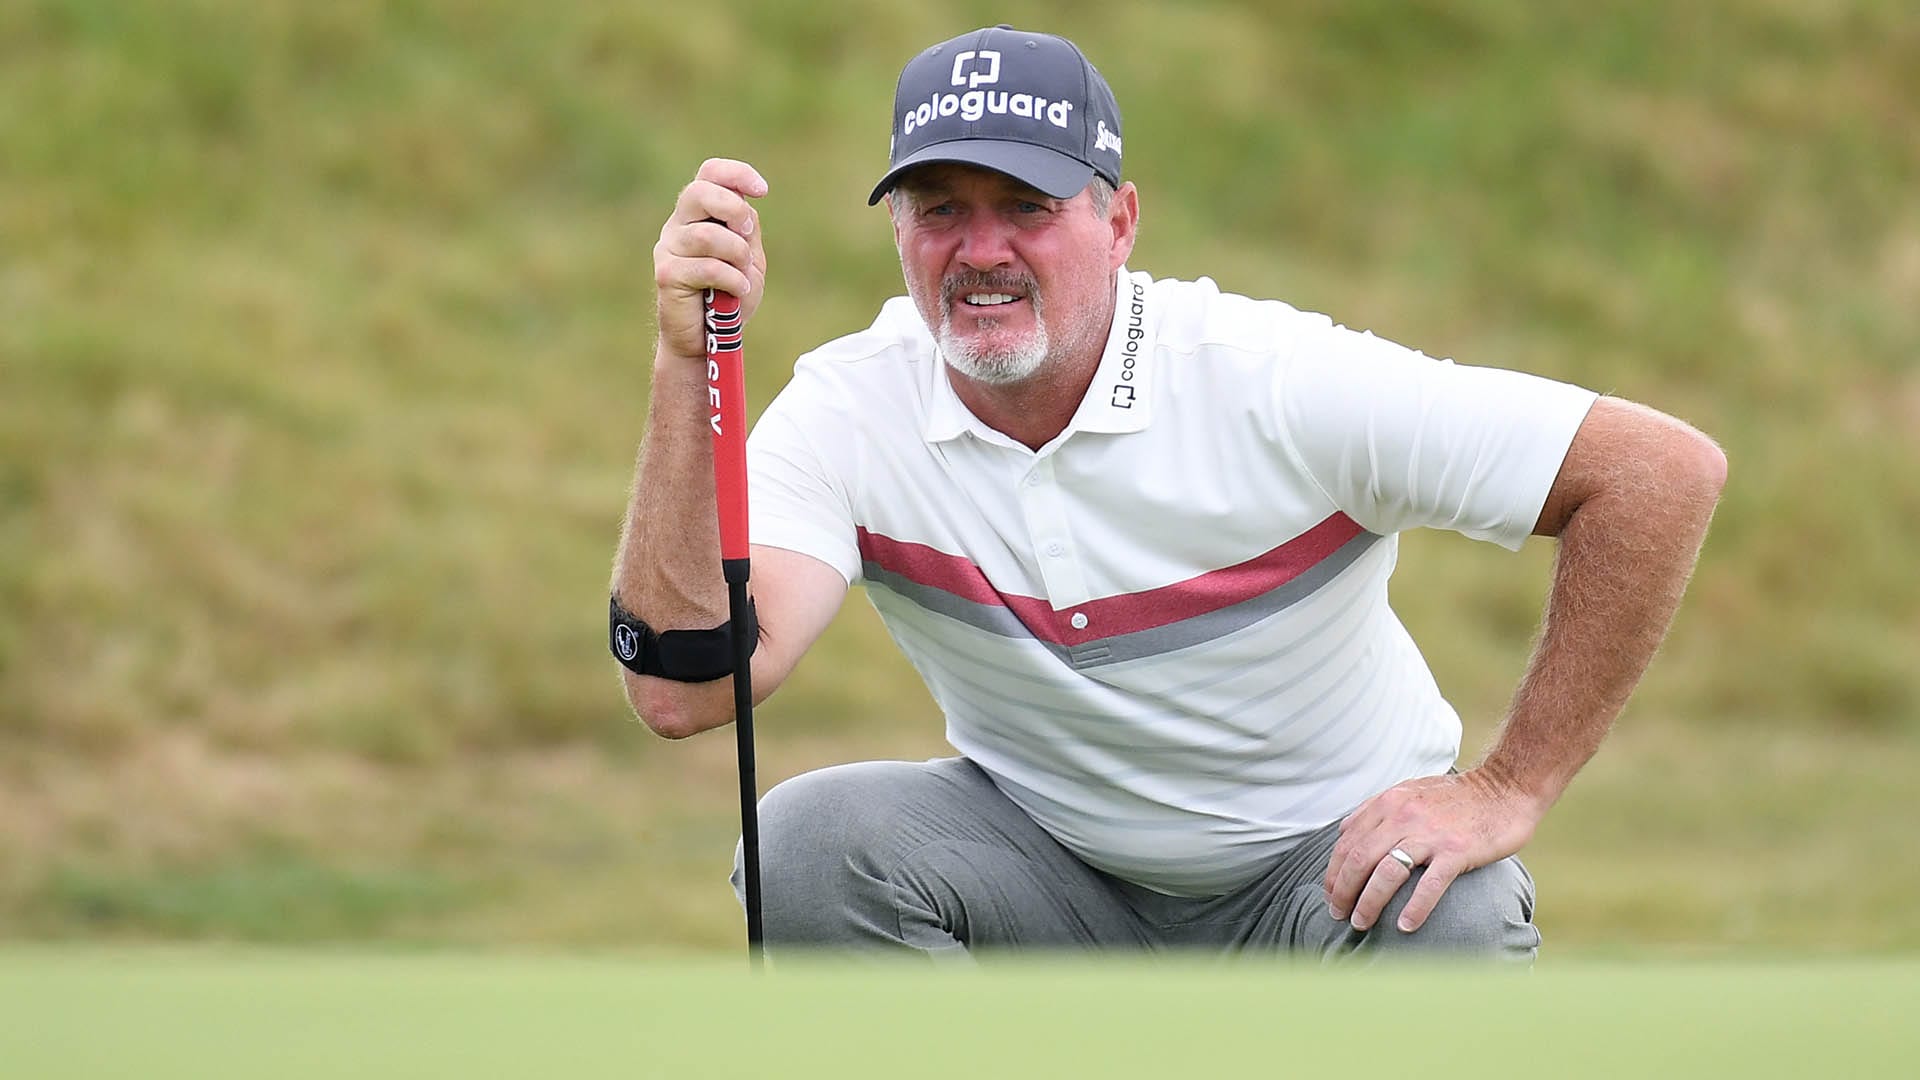 Jerry Kelly falters late but maintains one-shot lead at Senior Players